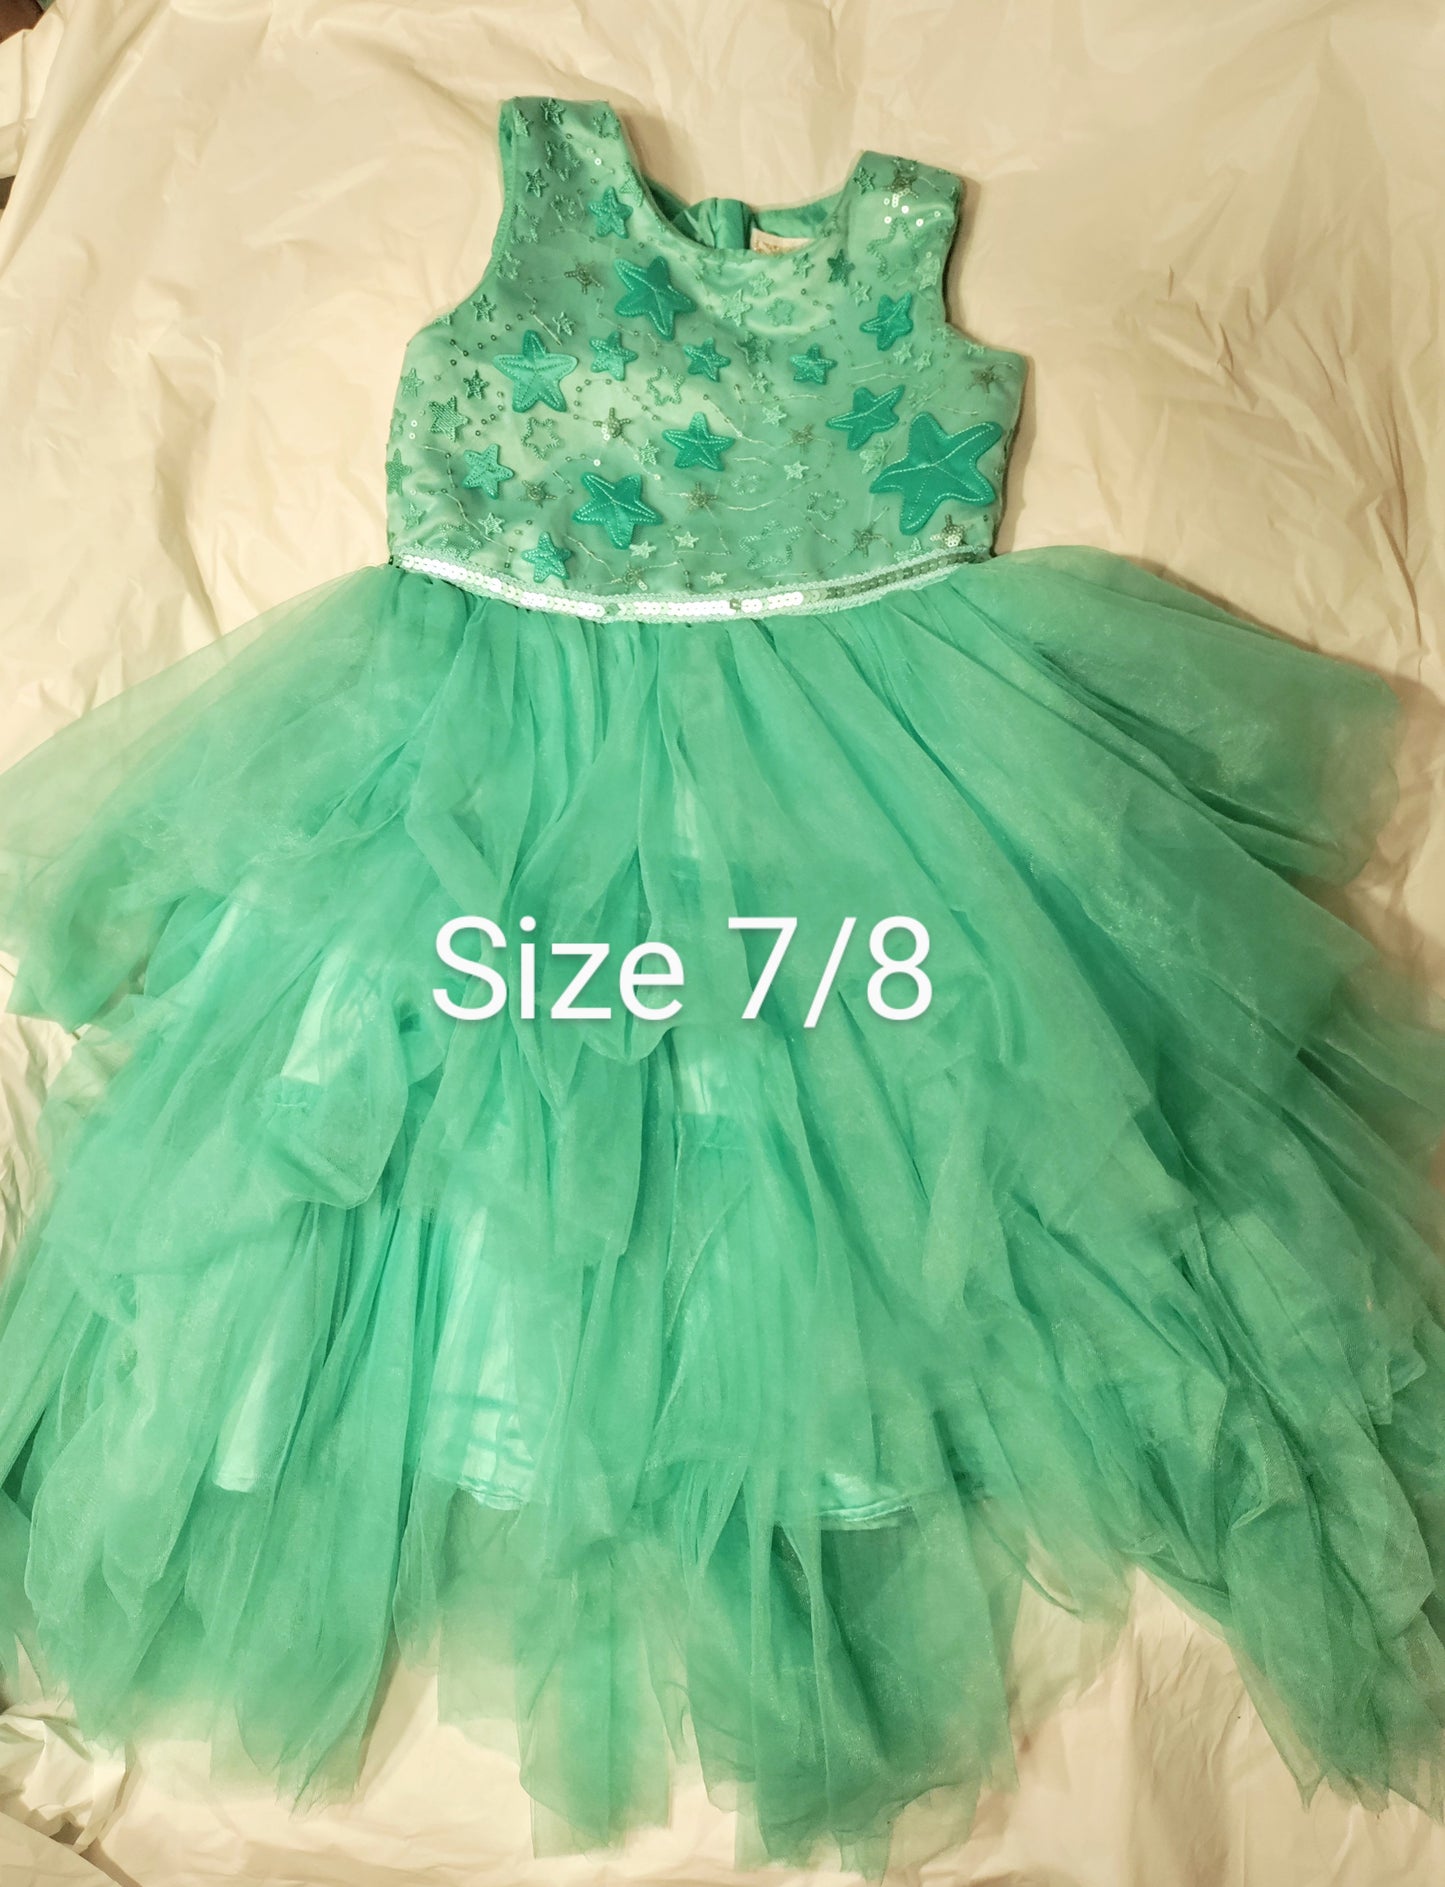 Teal Little mermaid inspired dress by Disney girls size 7/8 * reduced *